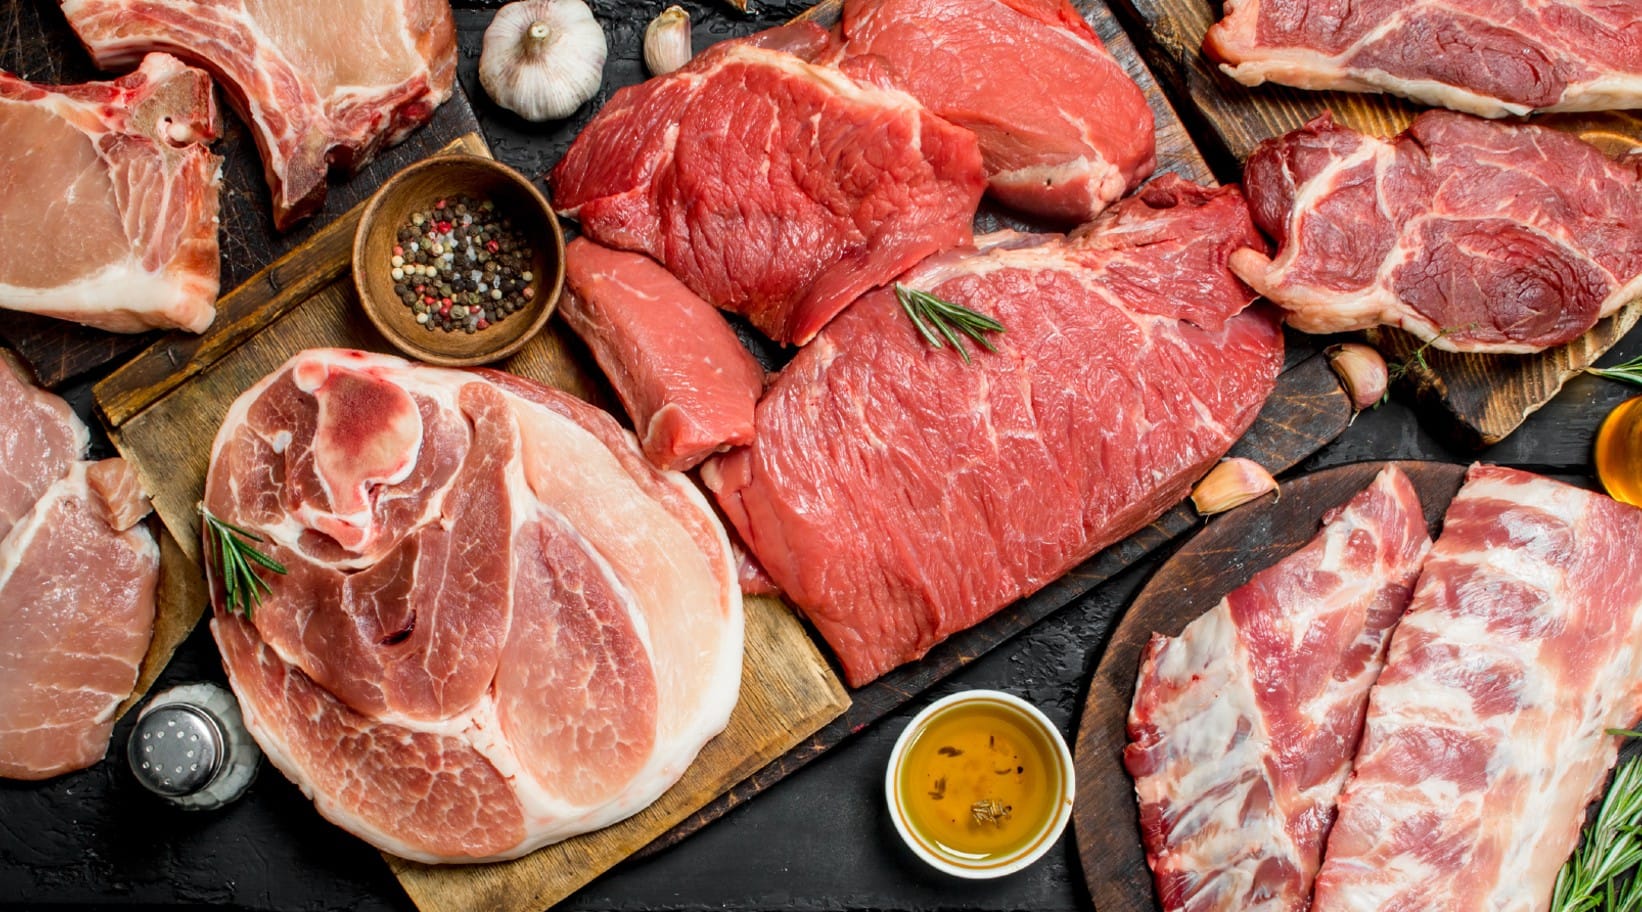 Phocas slices & dices the data of meat distributor Vic’s Meat (Pronto ERP)